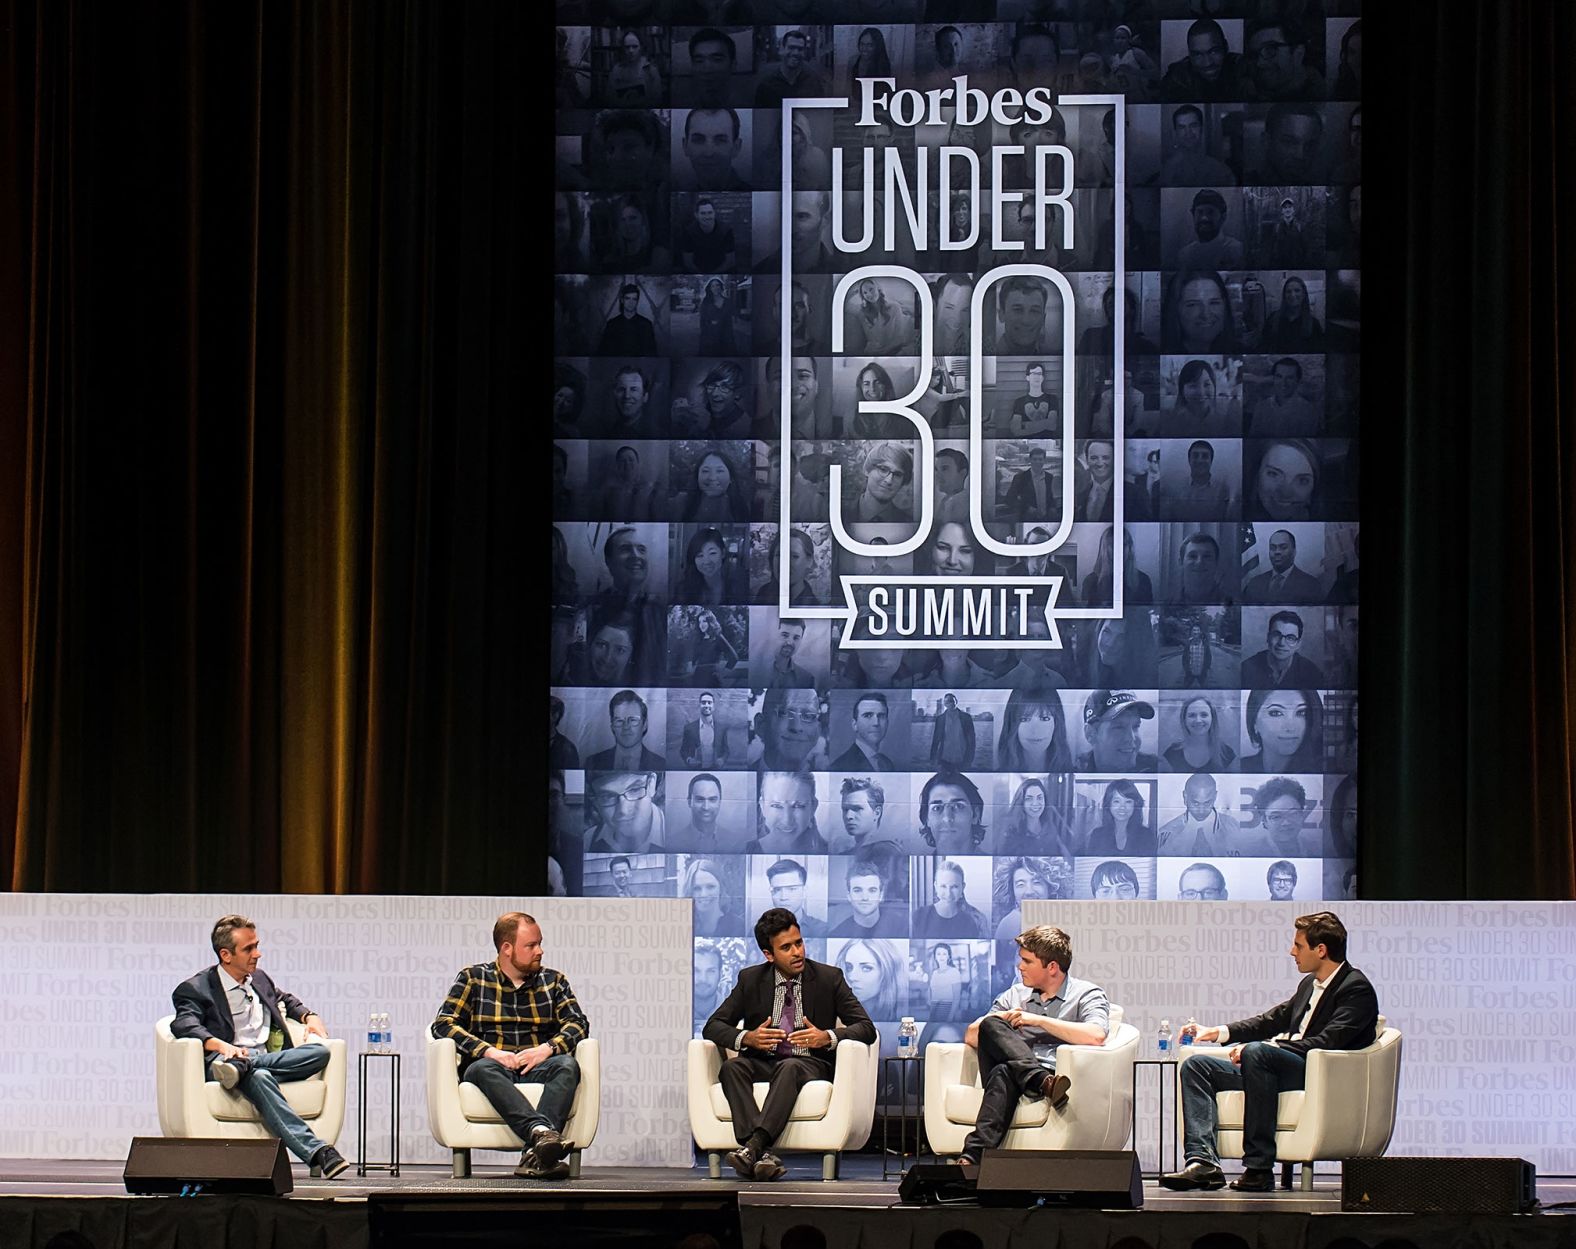 Ramaswamy speaks at the Forbes Under 30 Summit in Philadelphia in 2015.